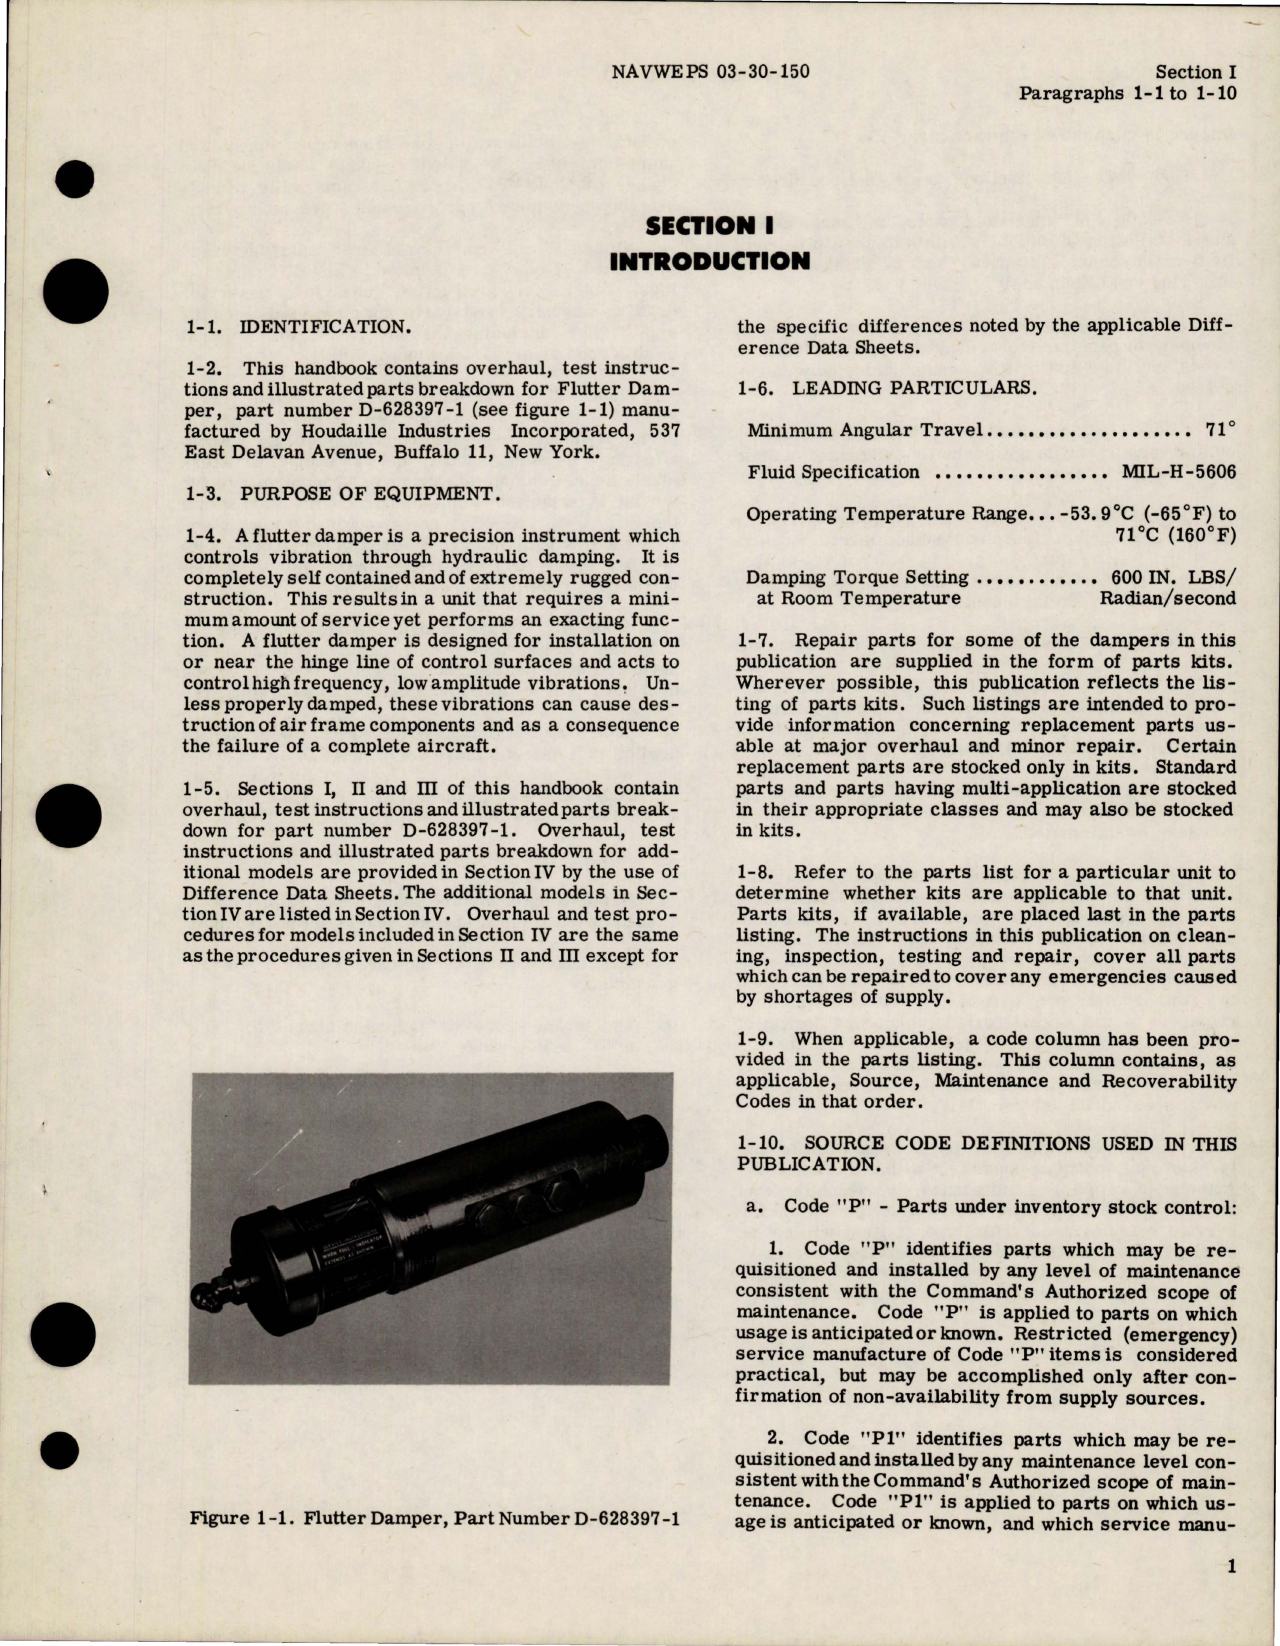 Sample page 5 from AirCorps Library document: Overhaul Instructions with Parts Breakdown for Flutter Dampers 